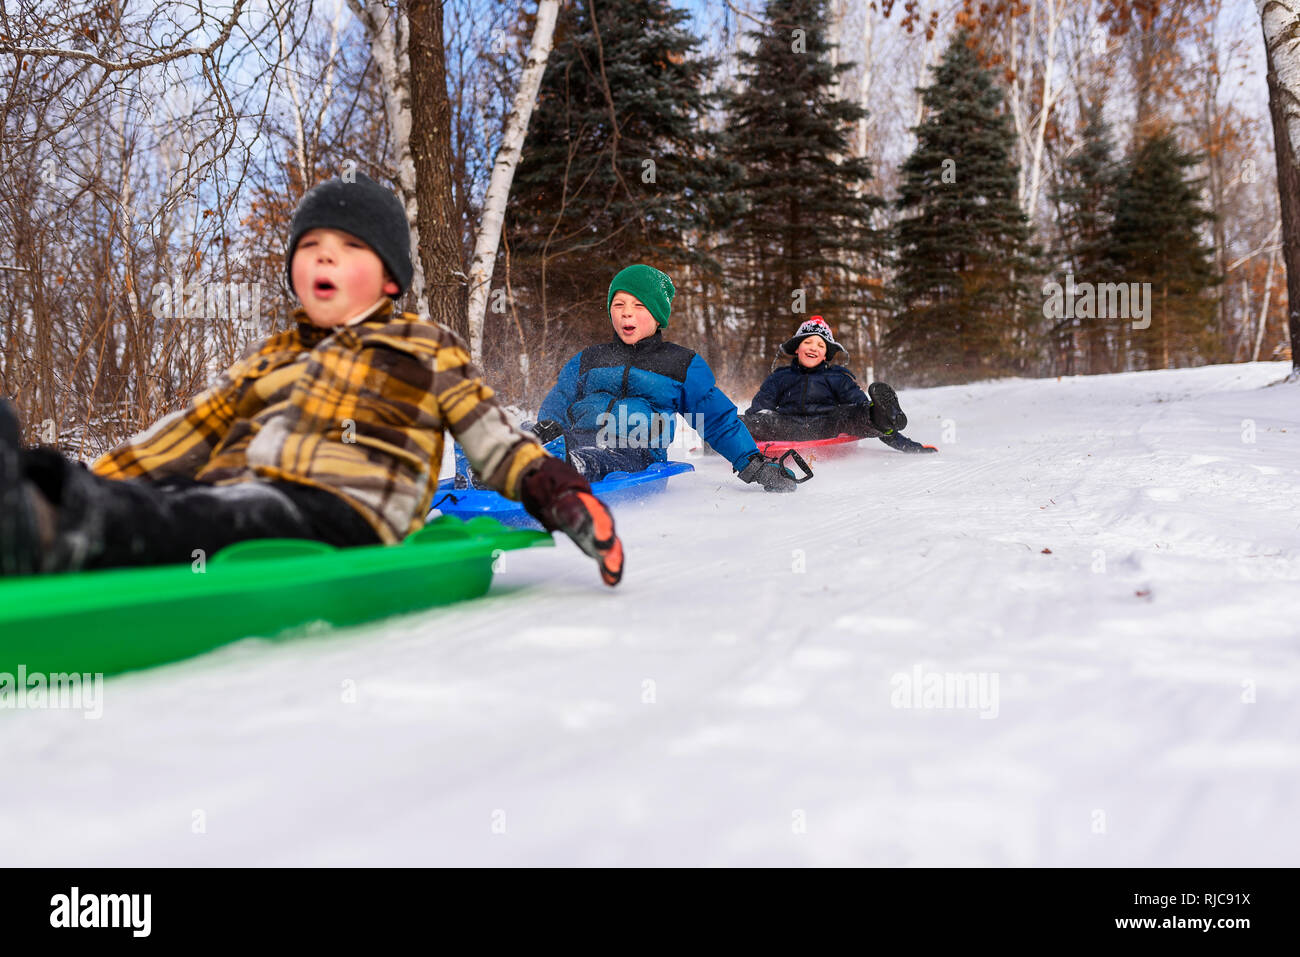 Three boys on a sledge laughing, Wisconsin, United States Stock Photo